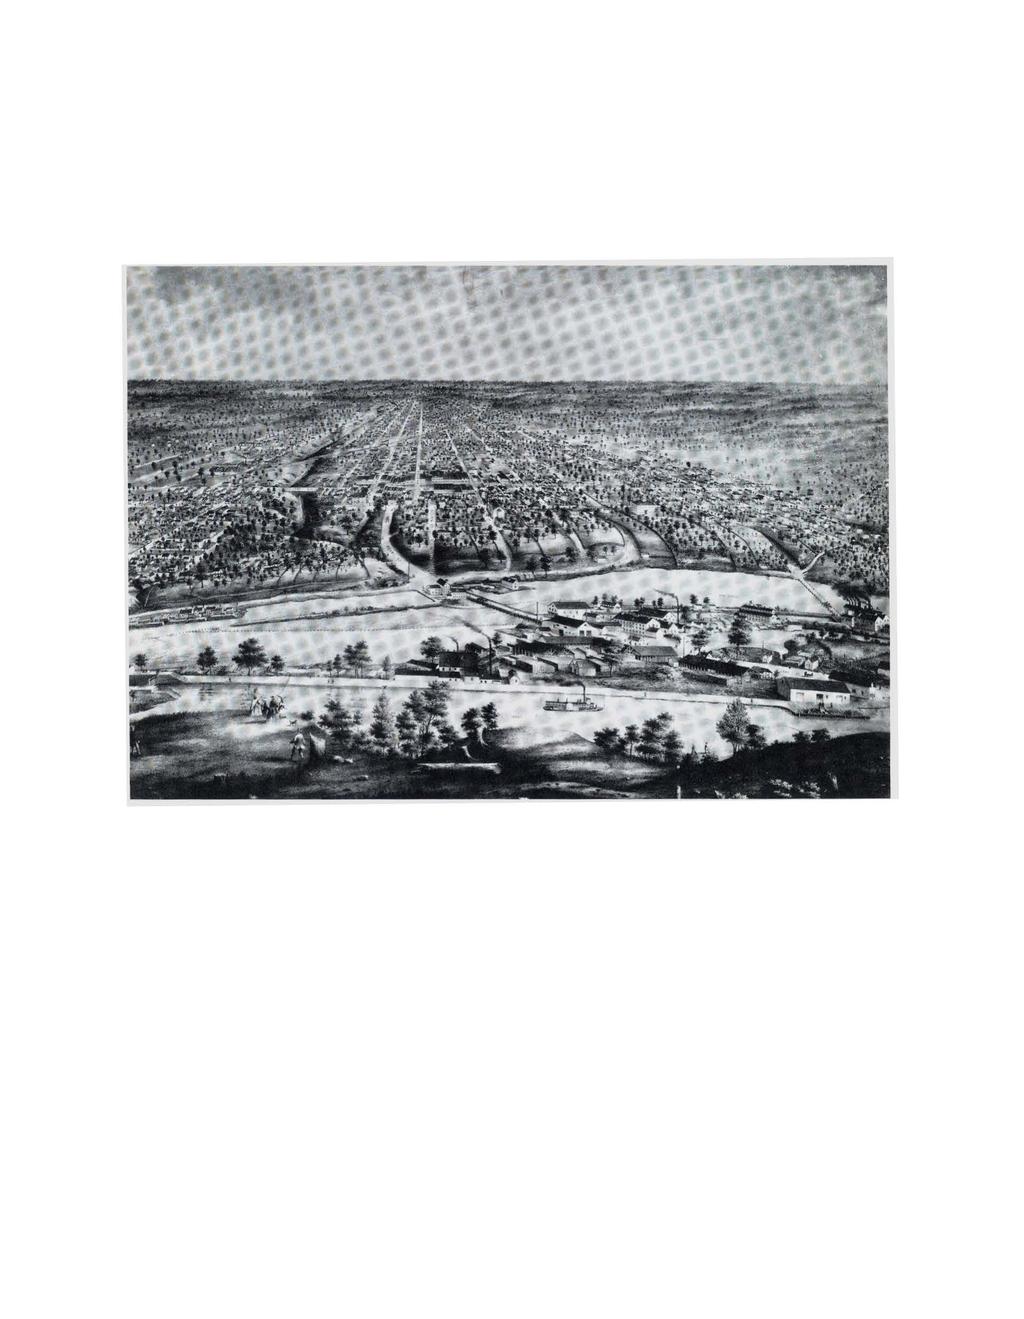 Figure 4. An 1874 lithograph showing a bird s eye view of the Fox River in Appleton, looking north.